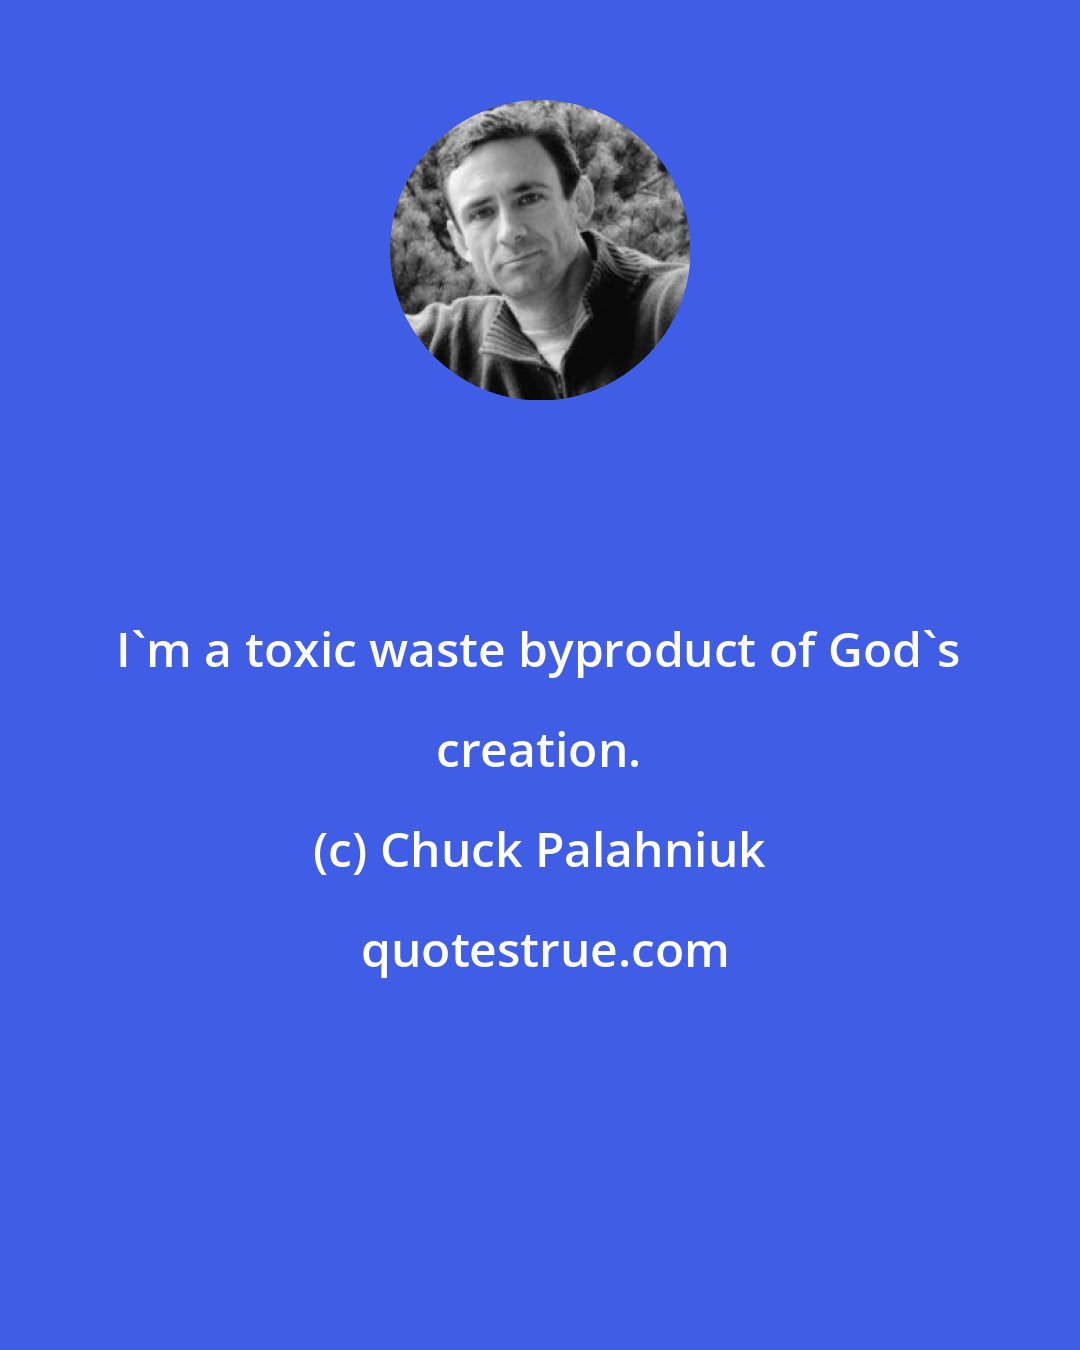 Chuck Palahniuk: I'm a toxic waste byproduct of God's creation.